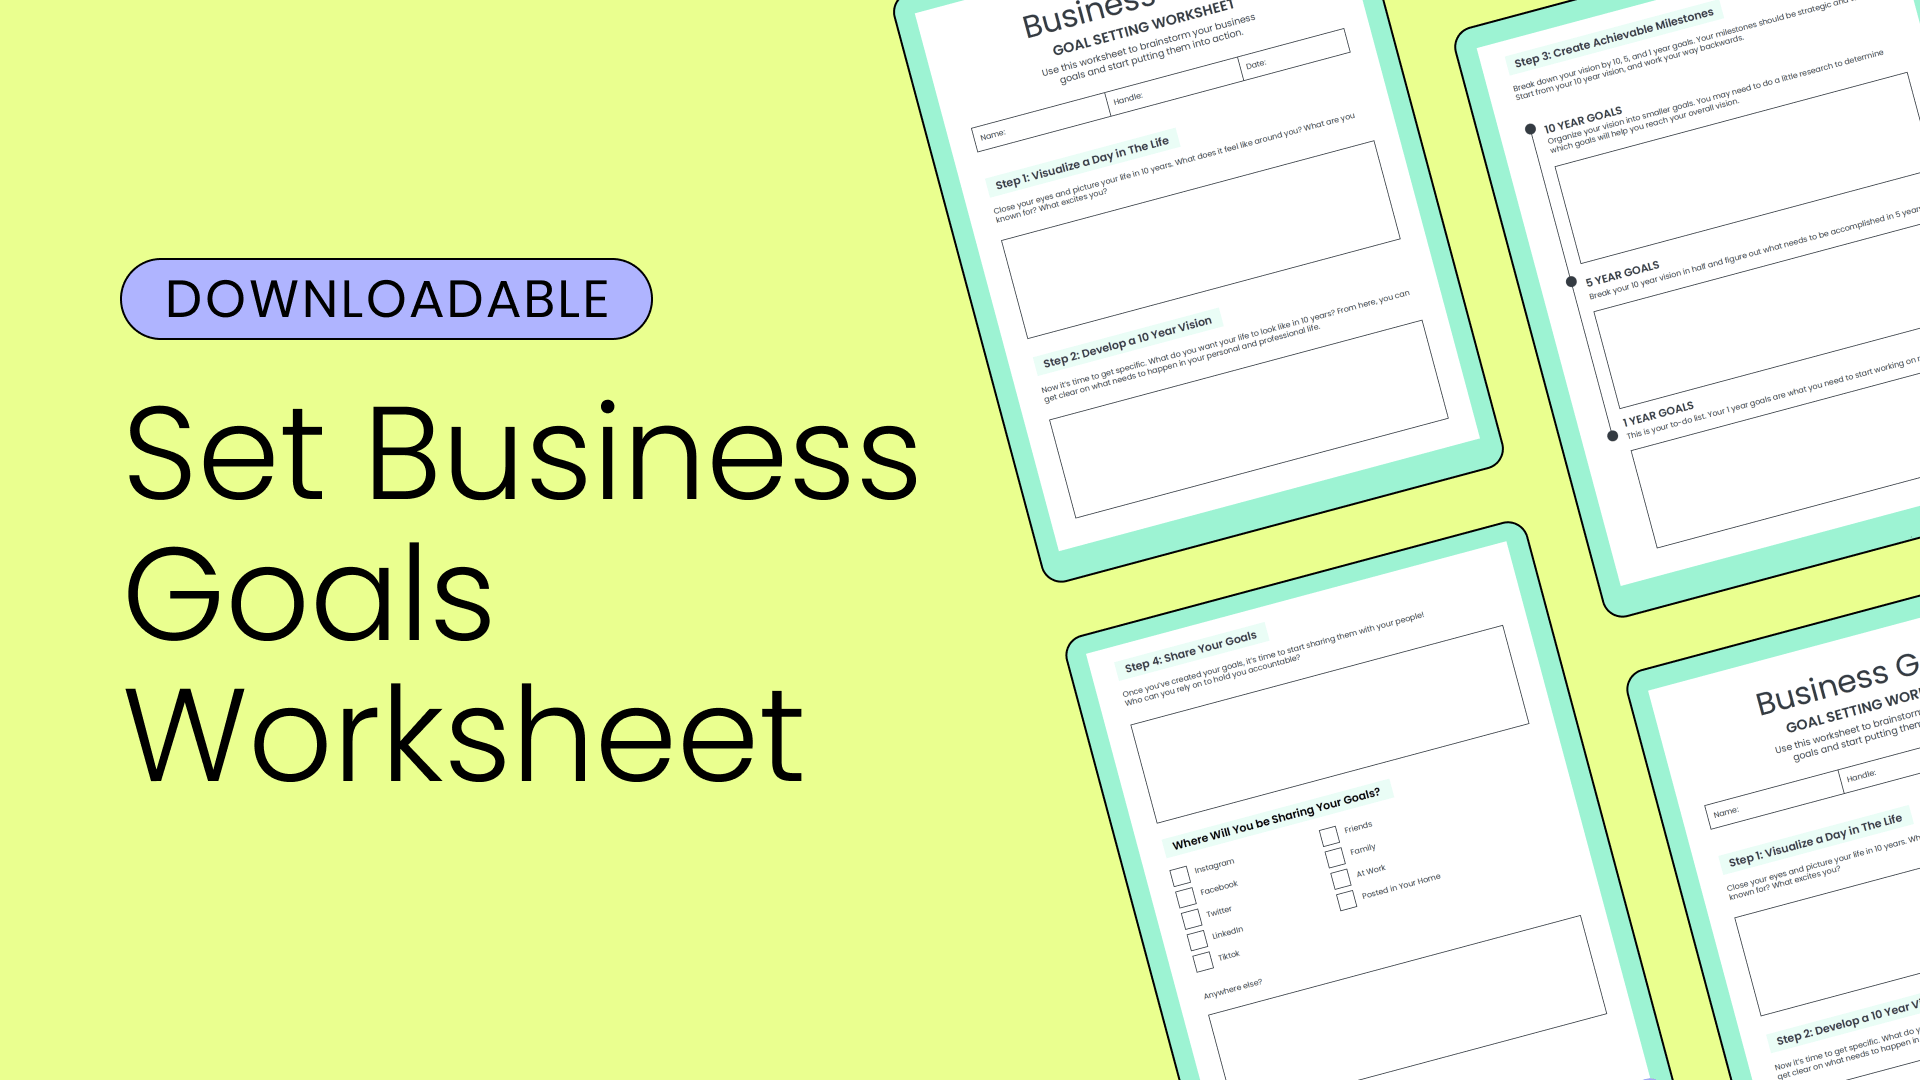 Cover poster highlighting the set business goals downloadable worksheet, including sample images of the guide